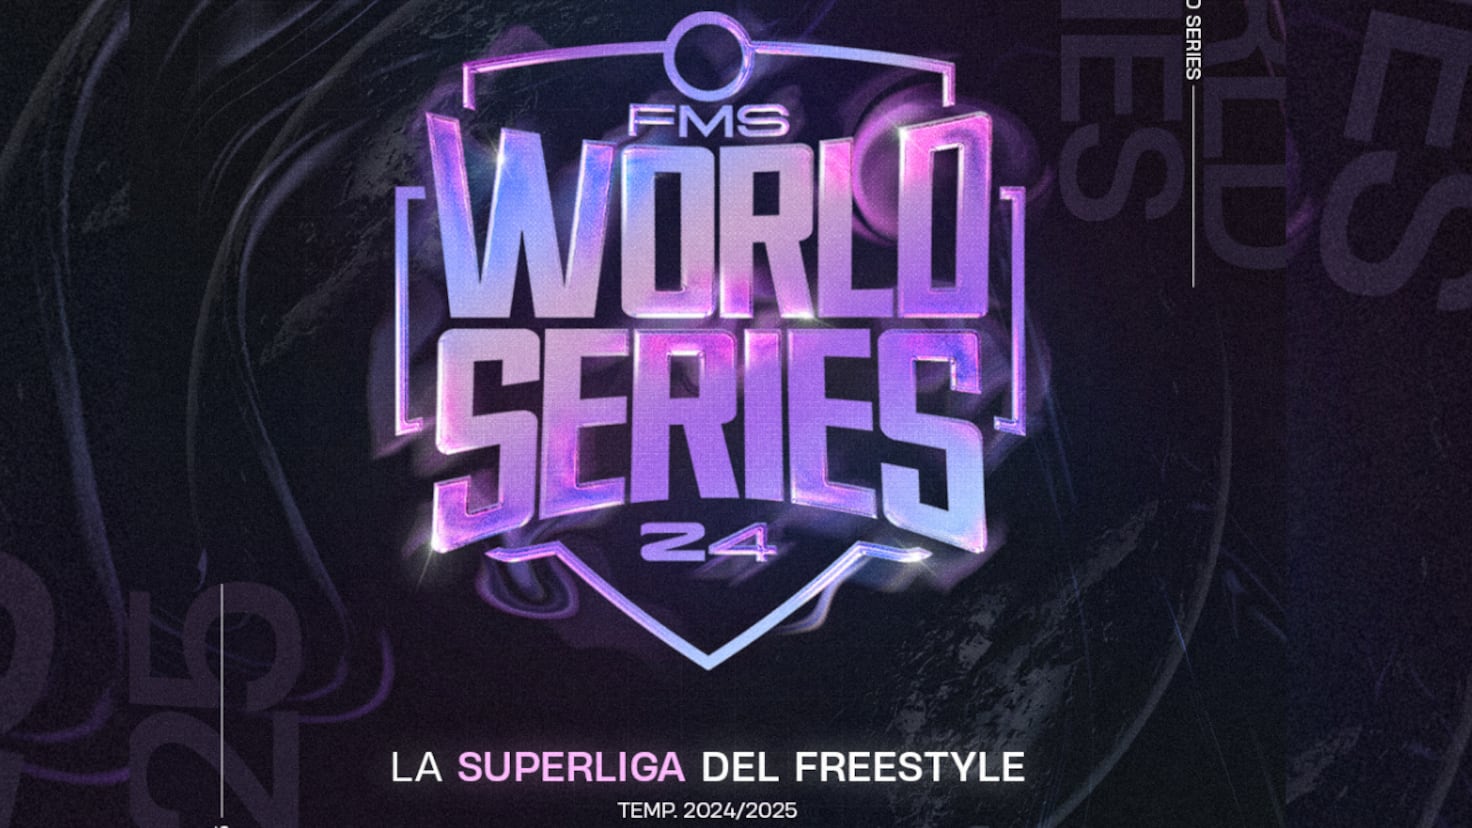 This is the new Freestyle Super League, FMS World Series: what it is, participants, dates, venues